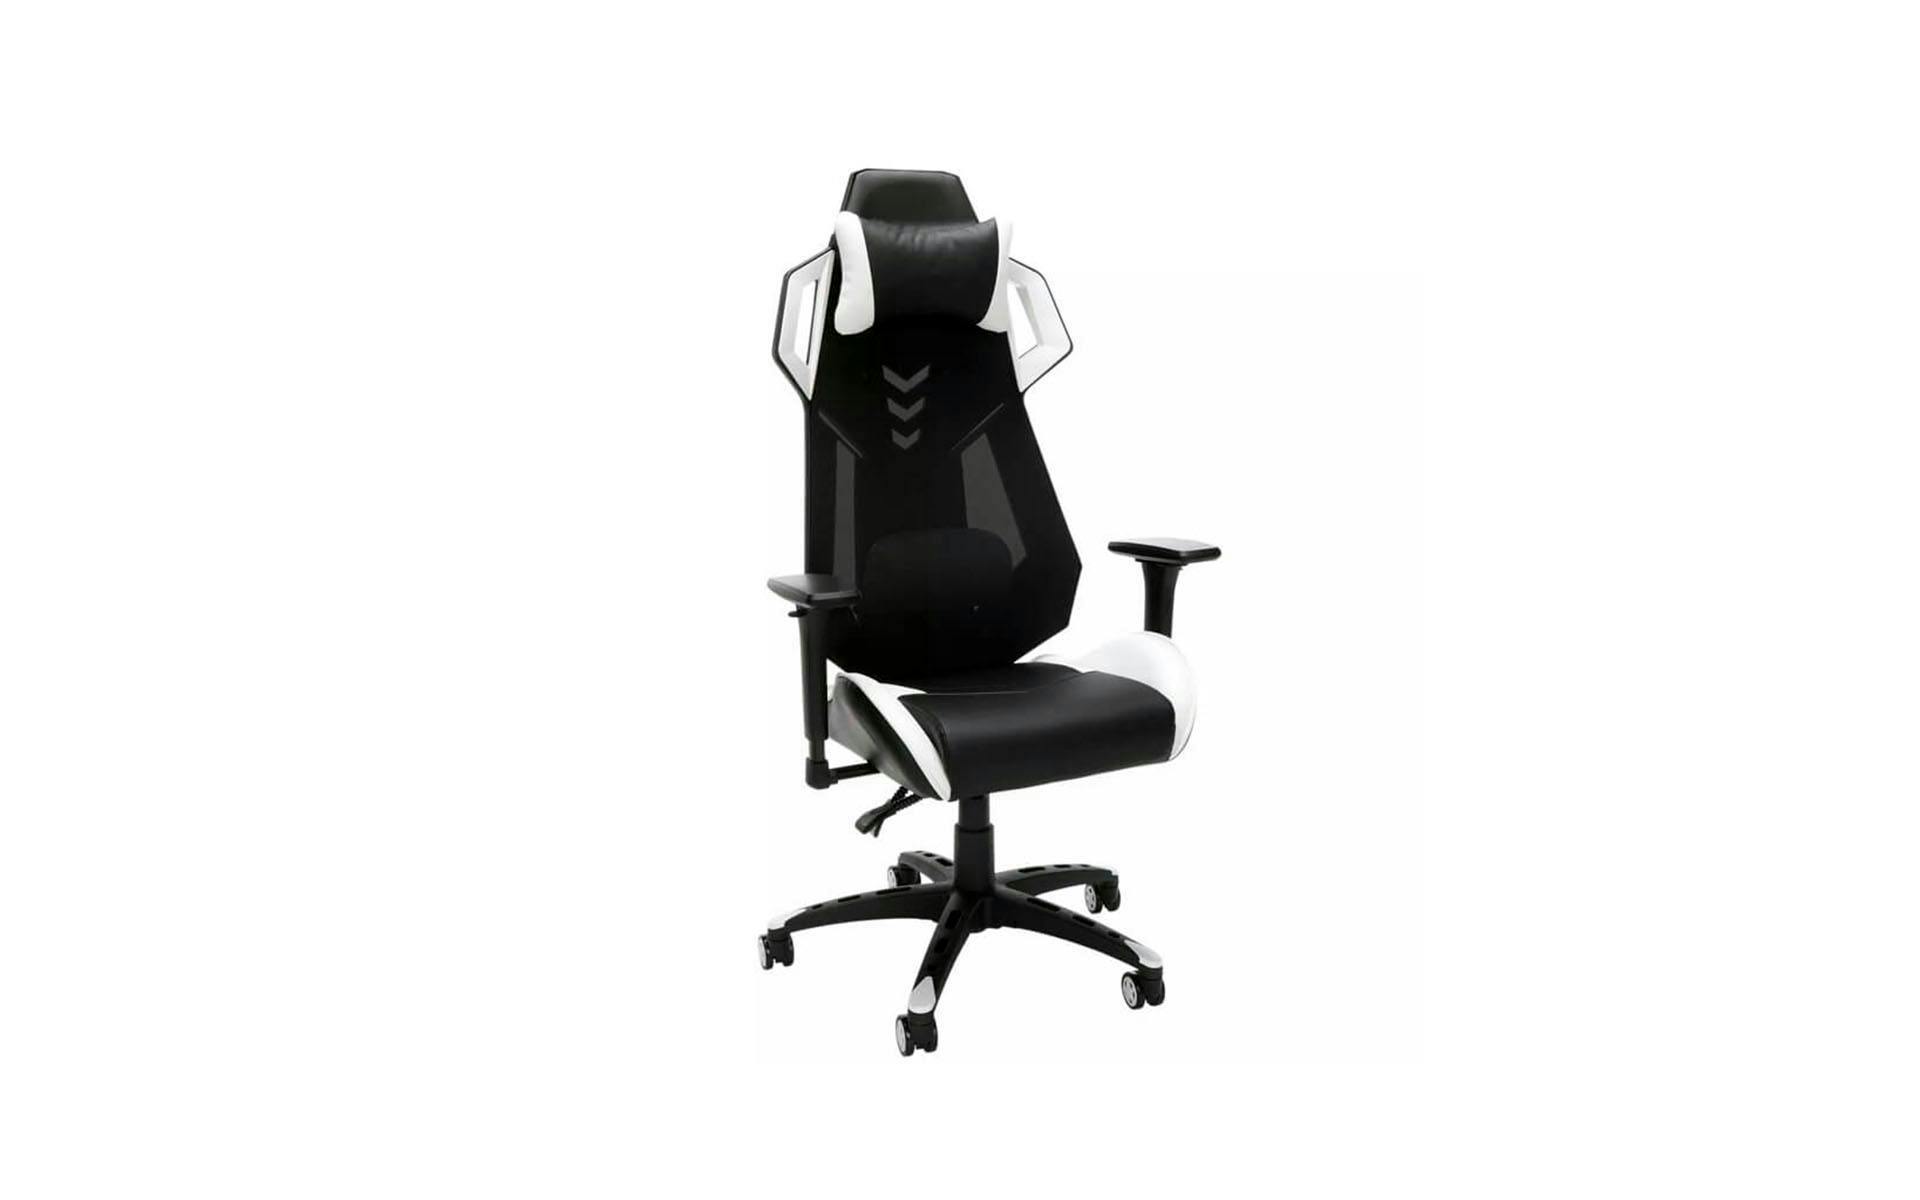 Black gaming chair with white accents